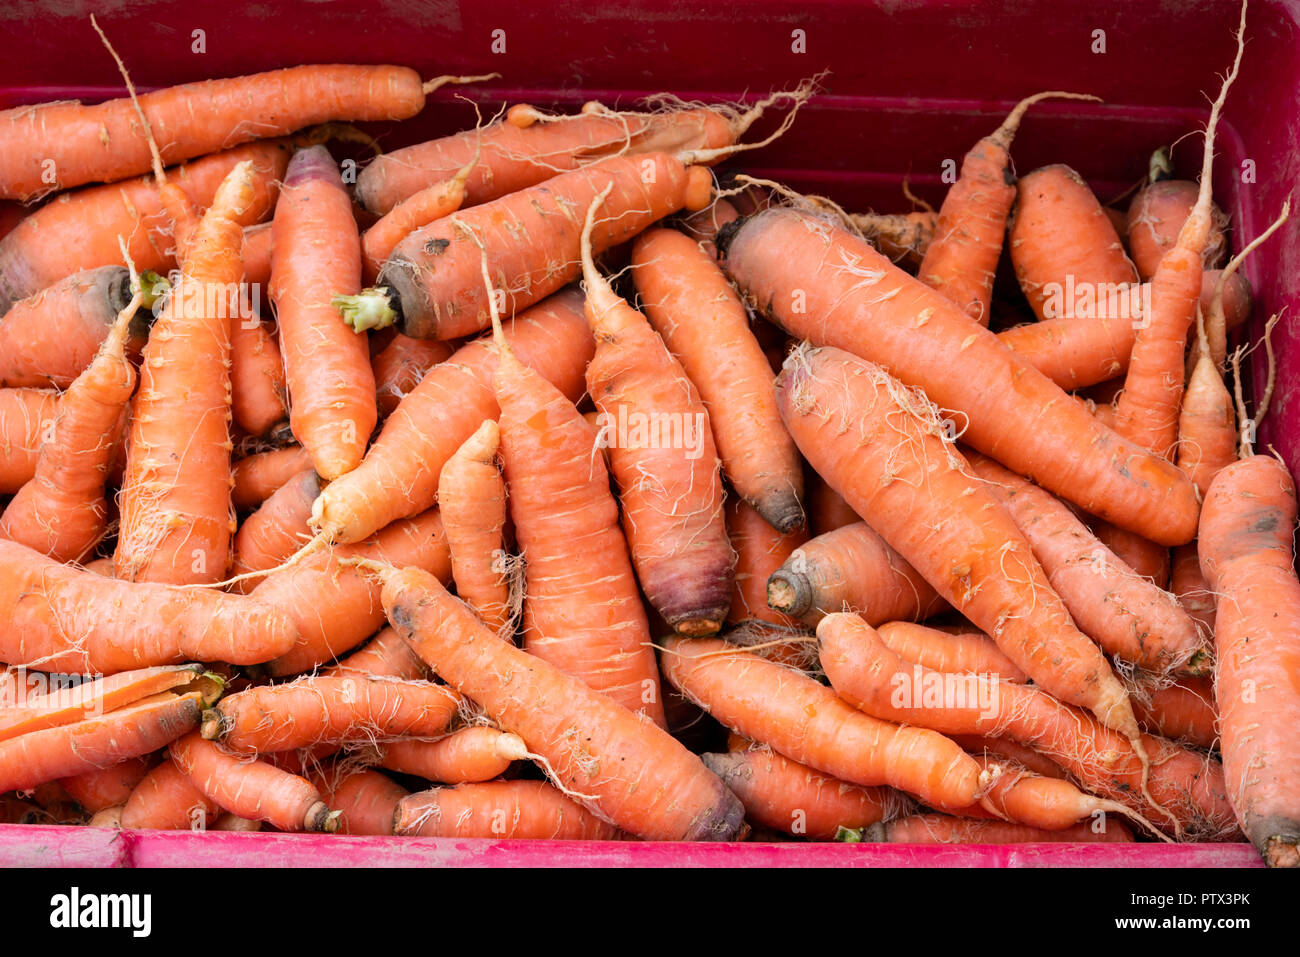 Orange carrots on display at the farmers market Stock Photo